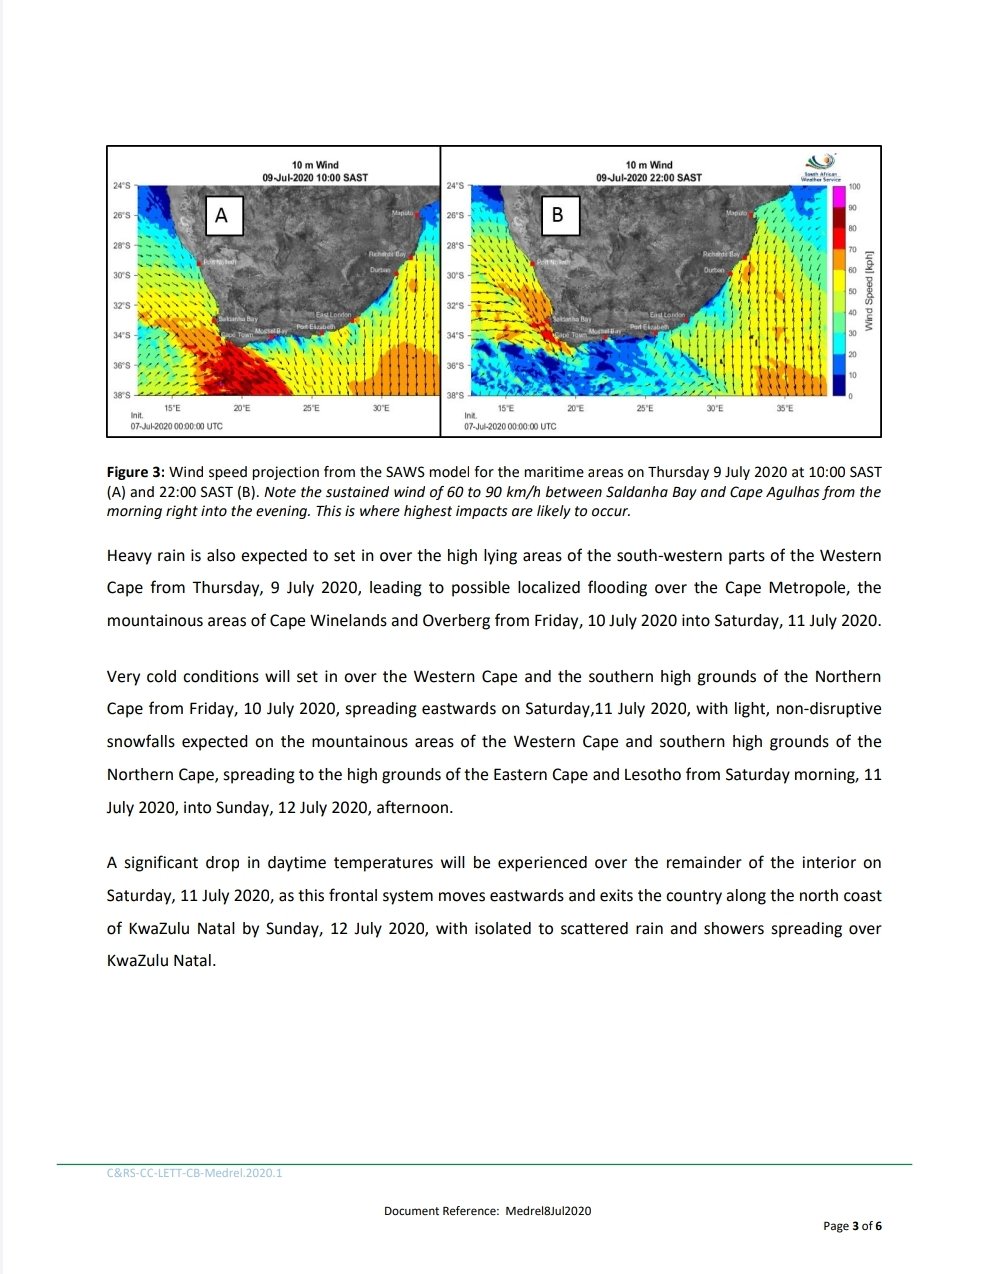 media release 2 cold fronts to bring bitterly cold weather and snow to South Africa #coldfront